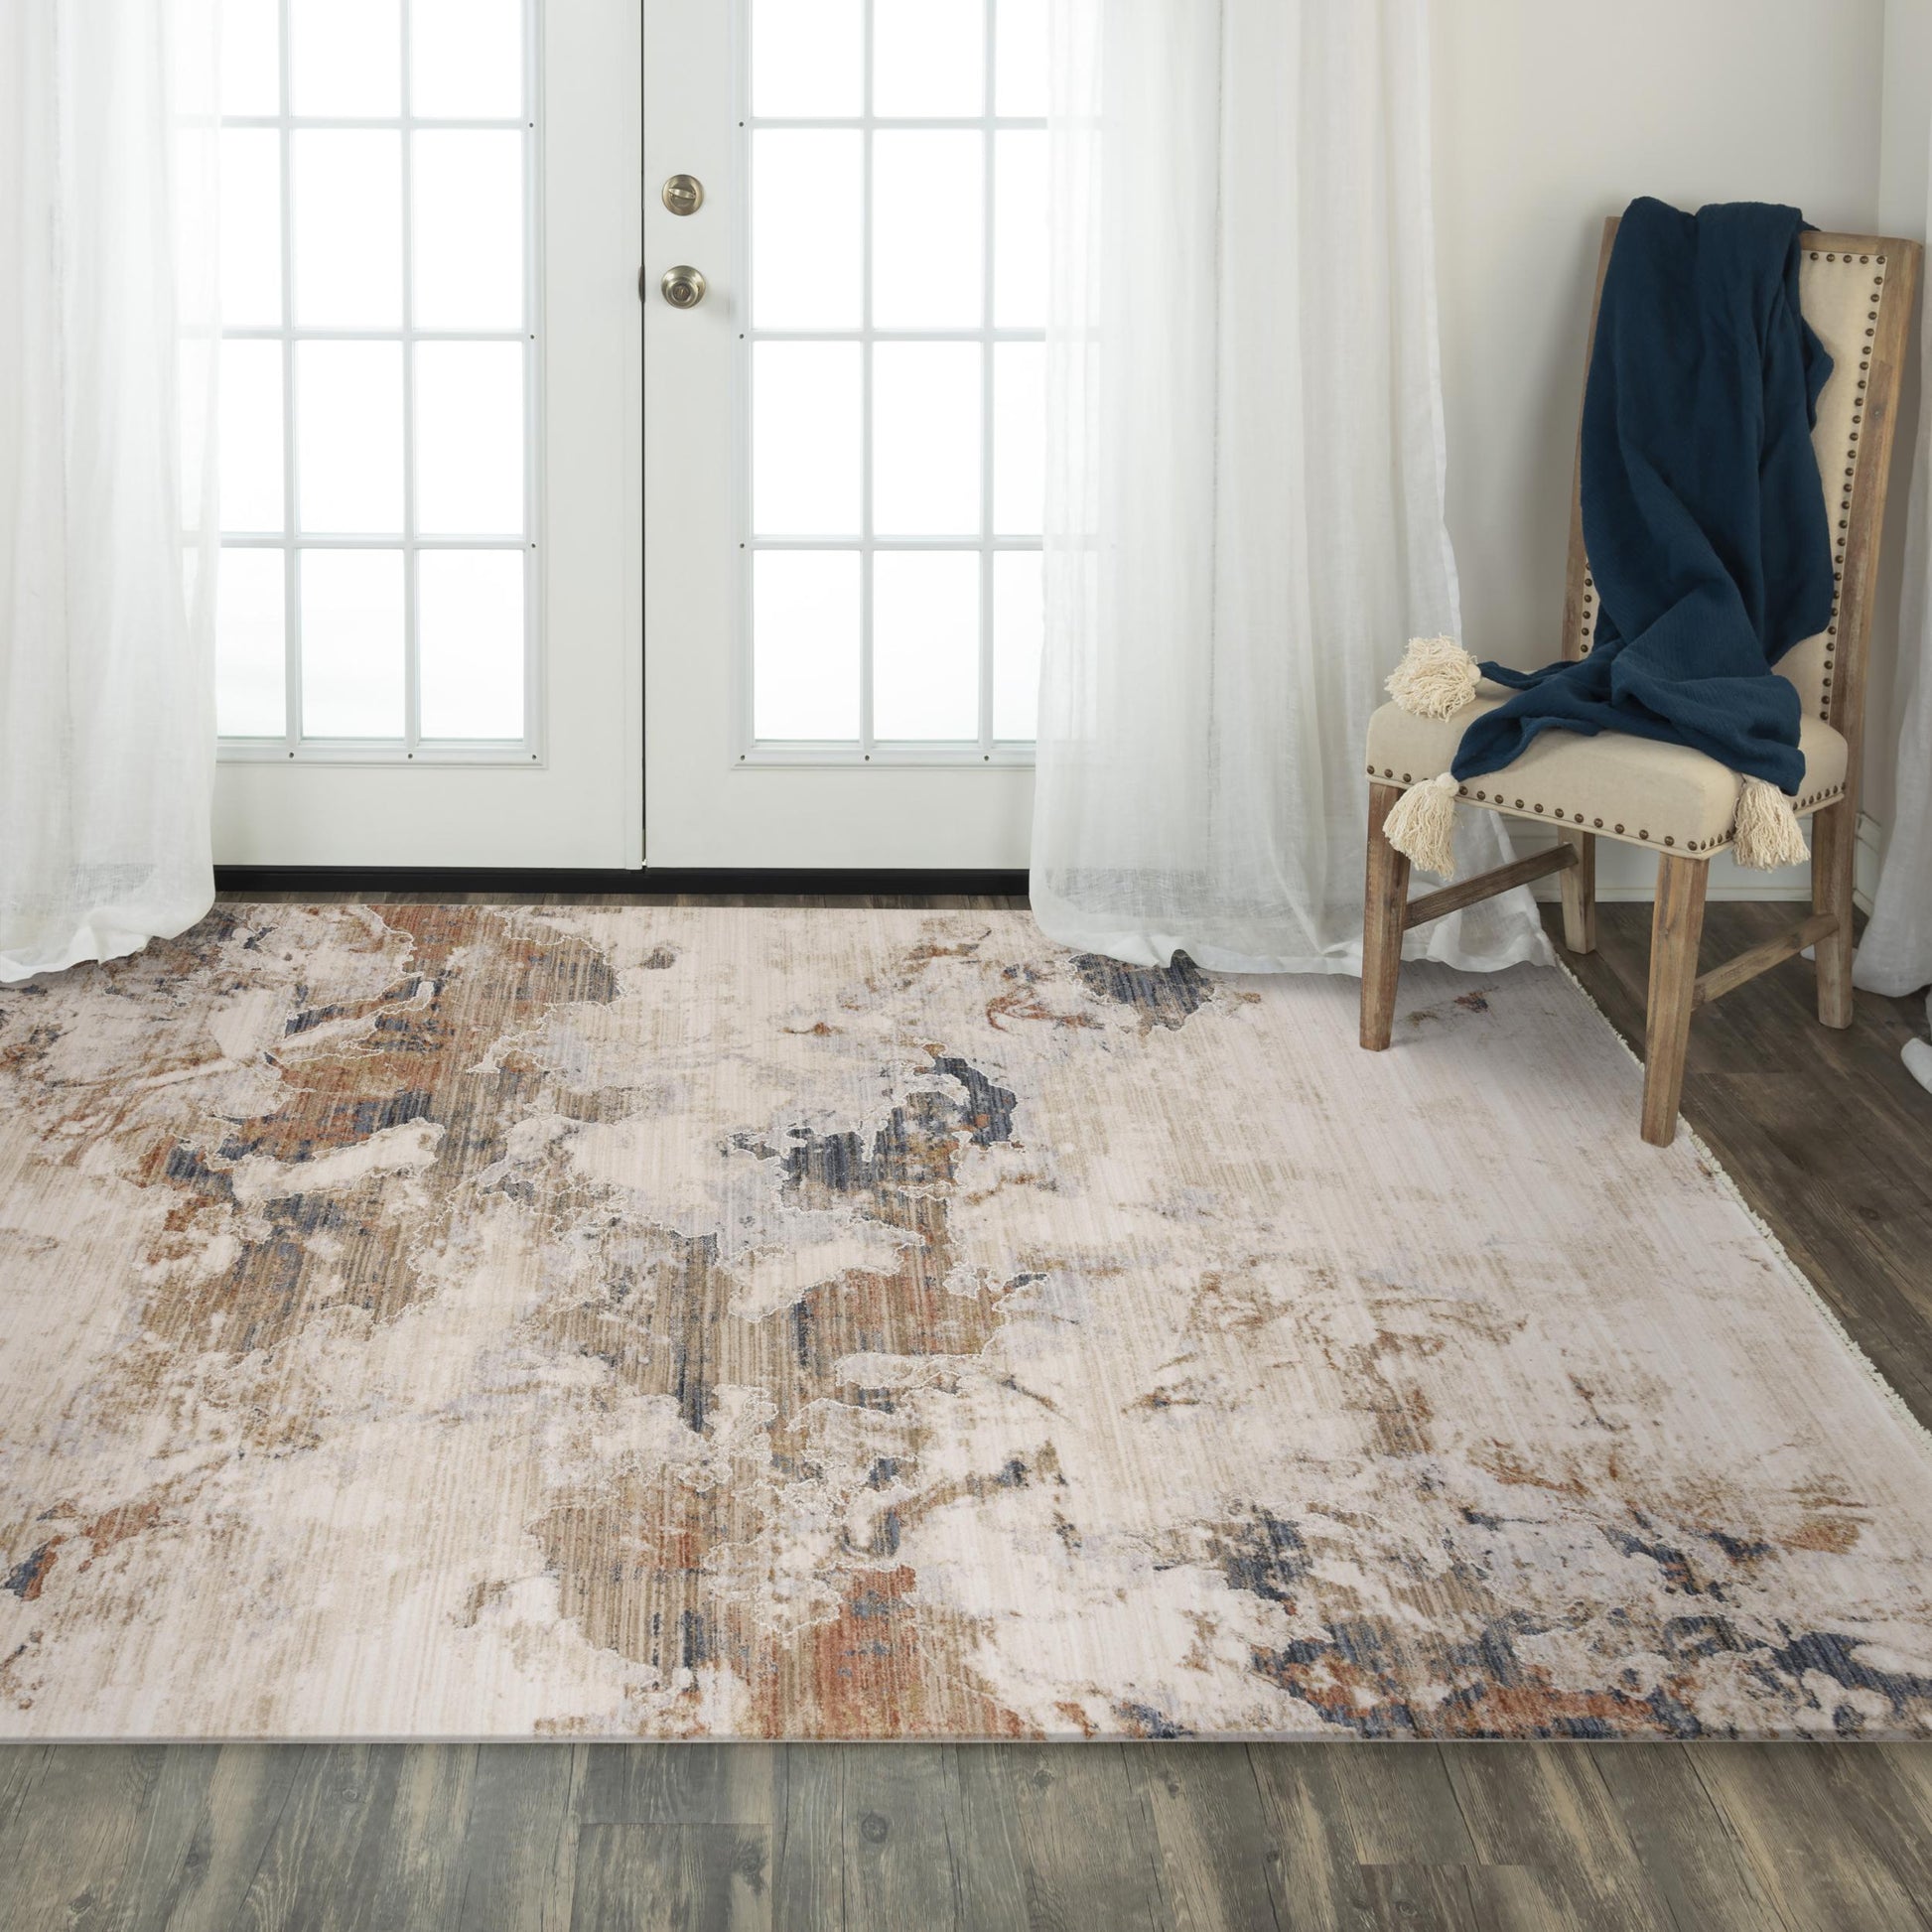 Rizzy Iconic Ico762 Natural Area Rug